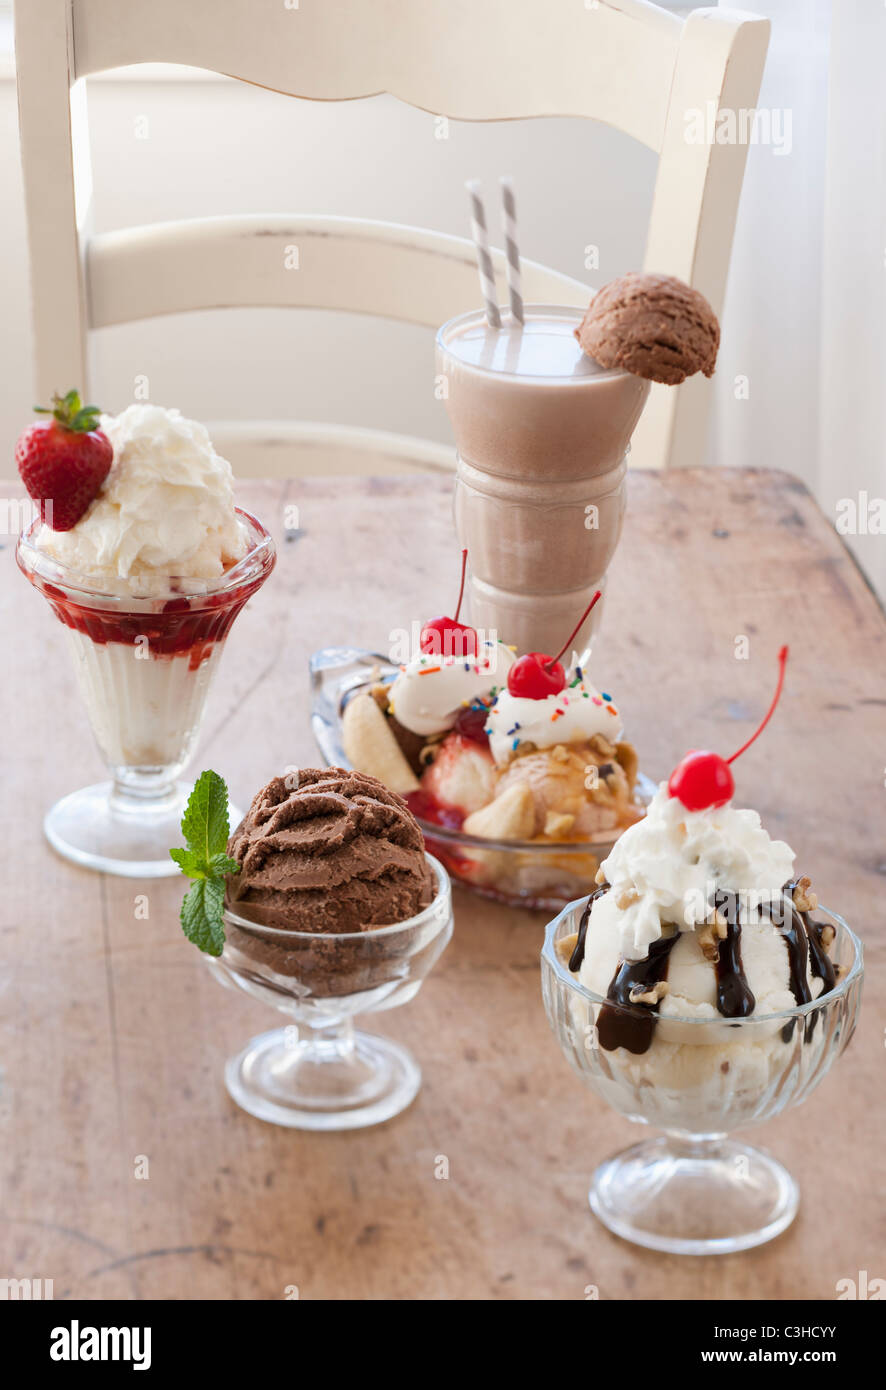 Selection of ice cream on table Stock Photo